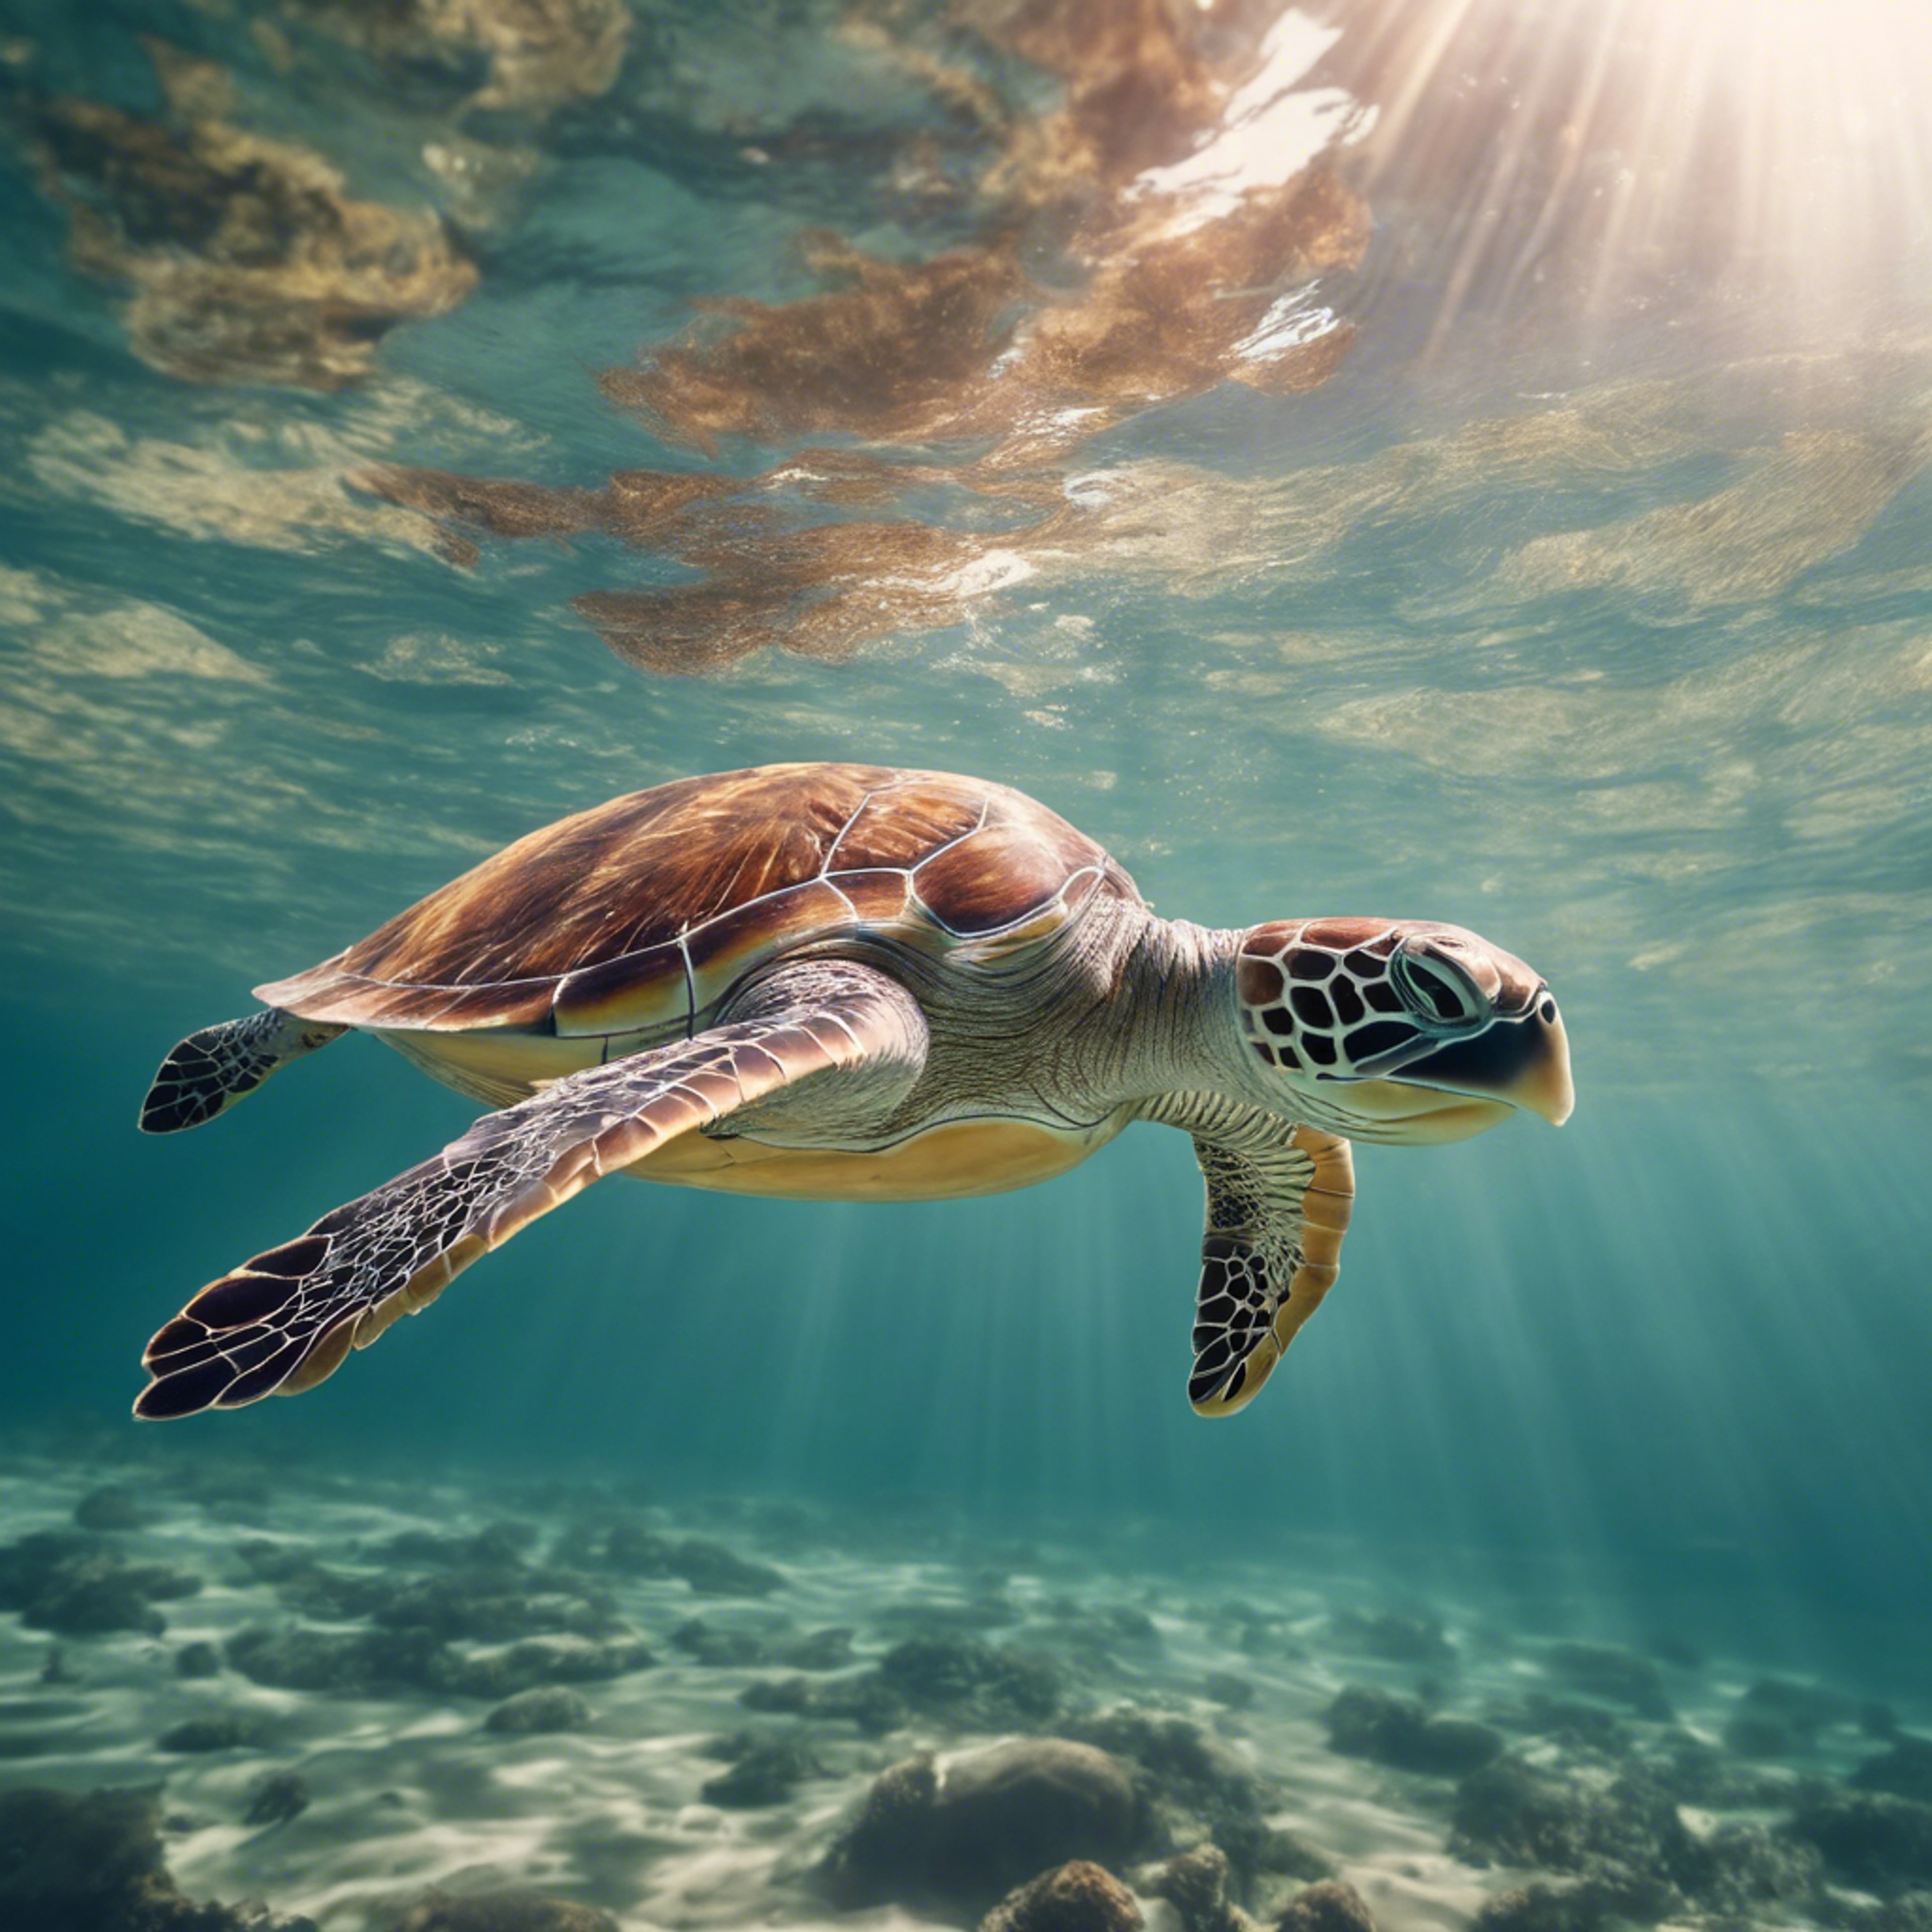 Sea turtle swimming leisurely in the ocean, with the sun penetrating the surface of the water above. Wallpaper[52b0564e310d4ce7b781]